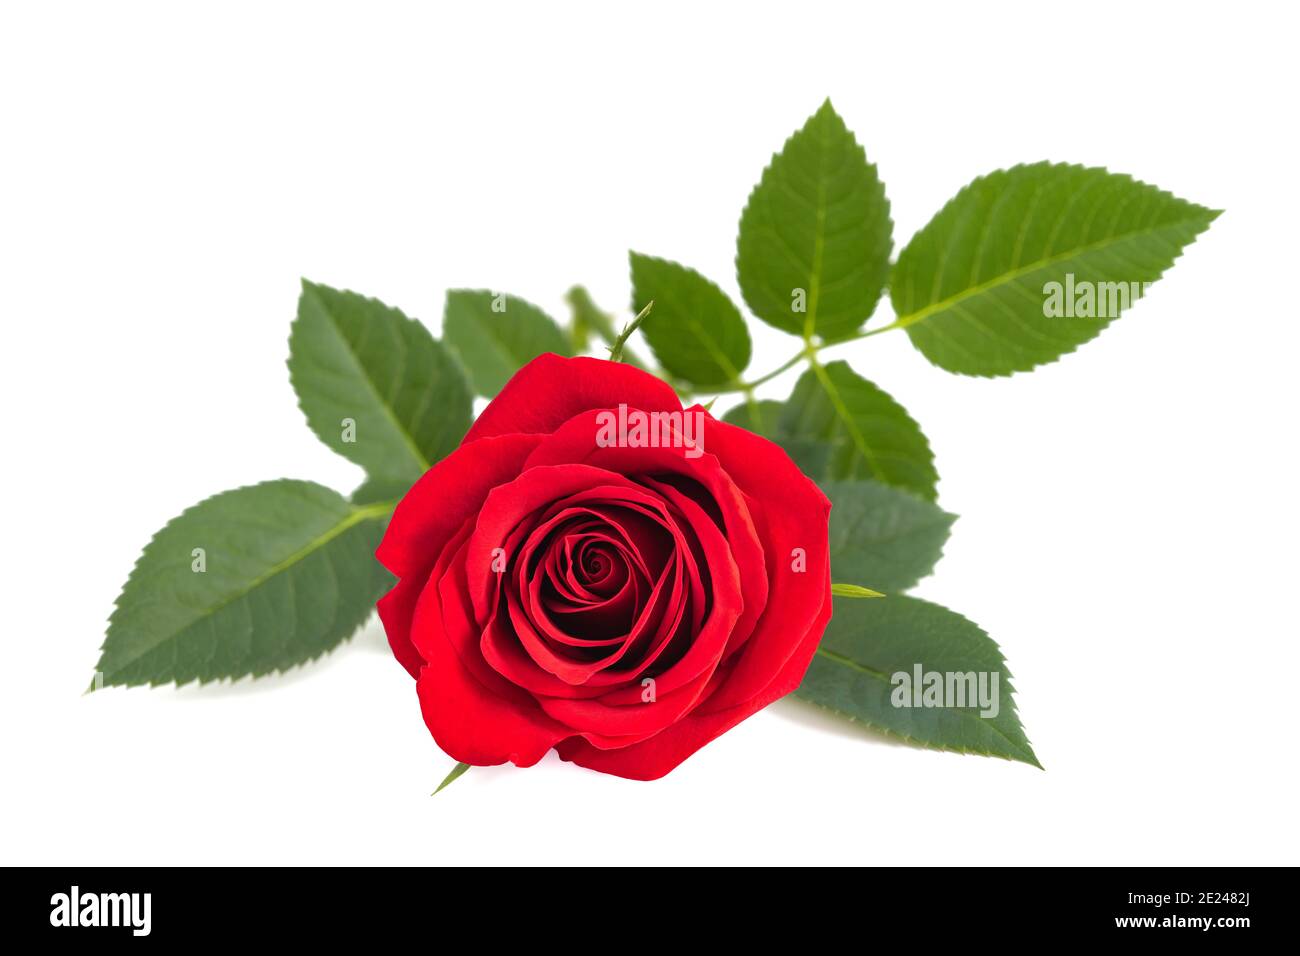 Red Rose Flower Isolated On White Background Stock Photo Alamy